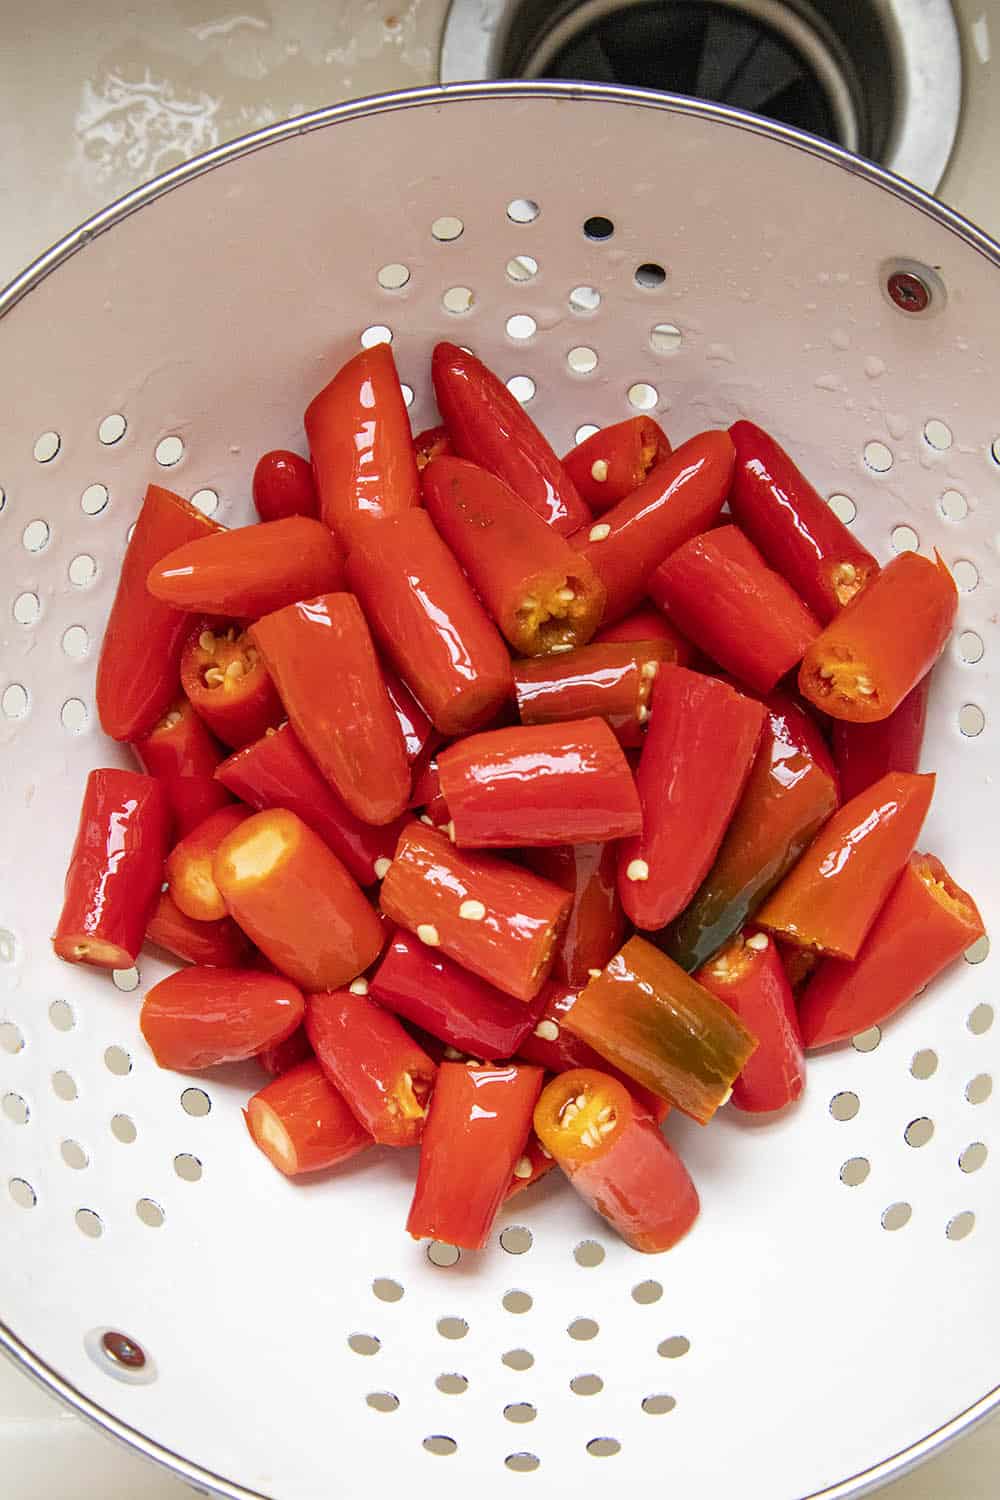 Fermented red serrano peppers